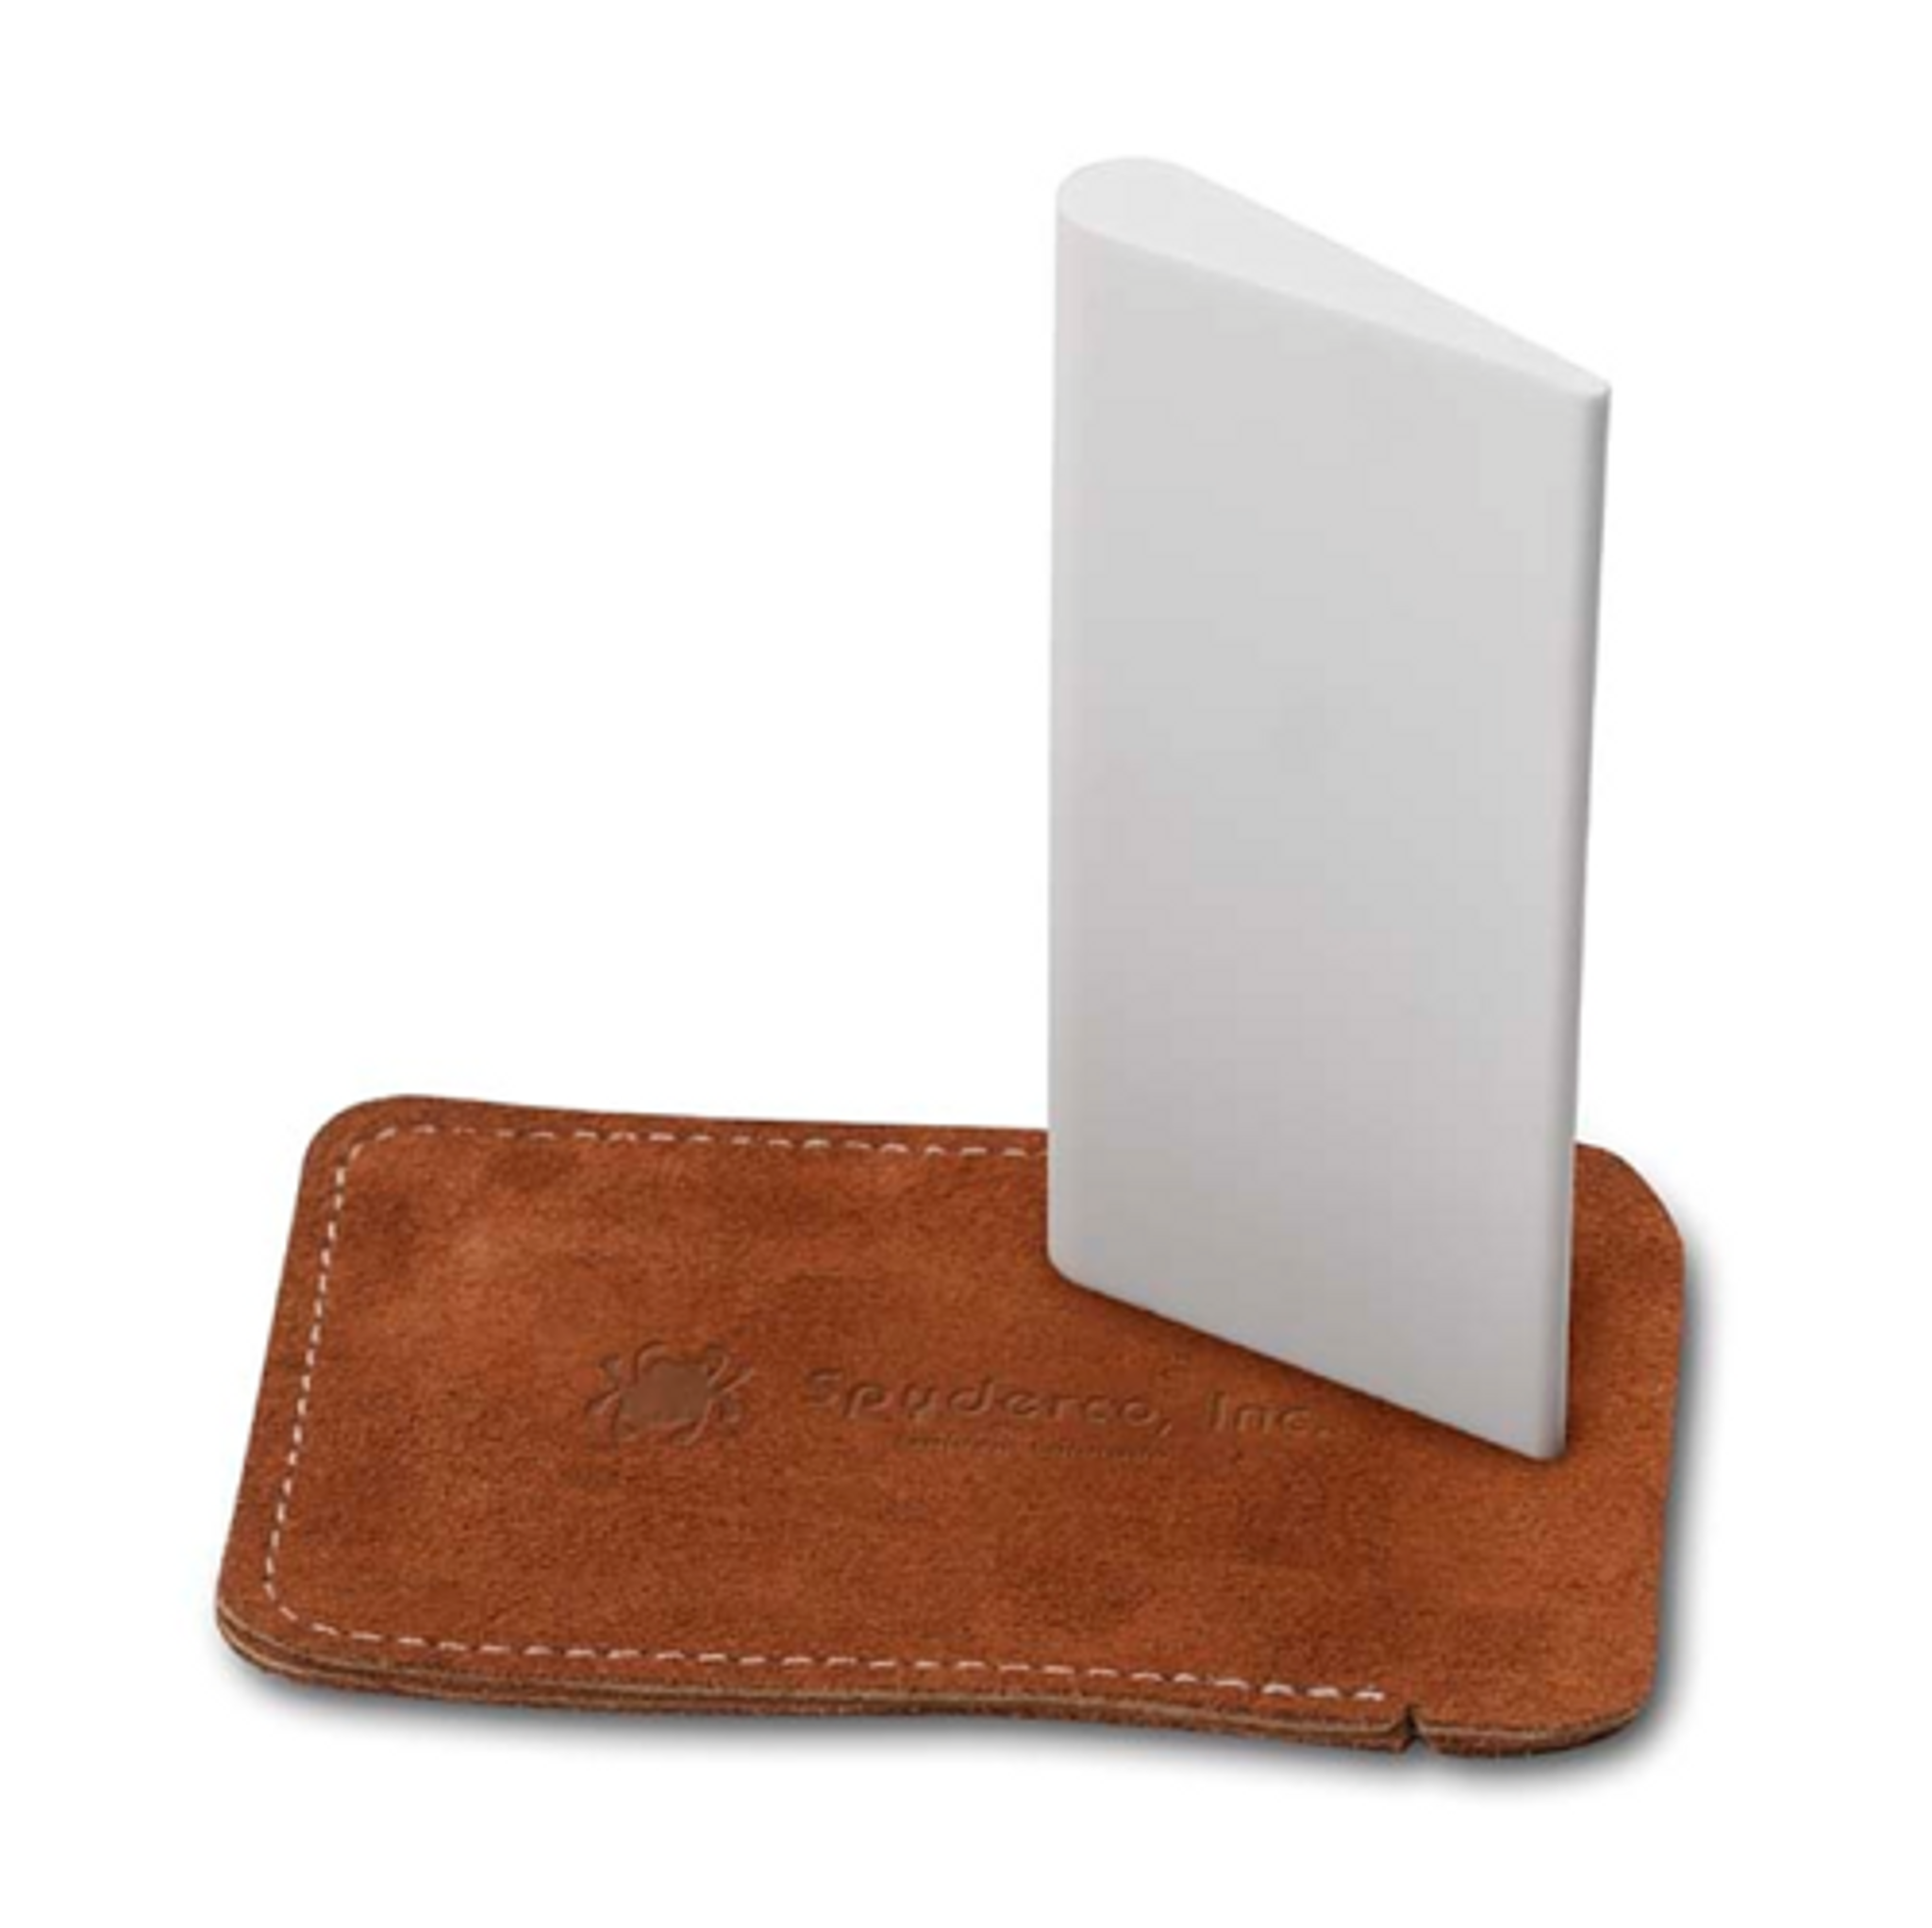 https://cdn11.bigcommerce.com/s-4zahyhmy/images/stencil/2048x2048/products/253/437/Spyderco_Slip_Stone_307F_Sharpening_Stone_Fine_Grit_Suede_Leather_Brown_Carrying_pouch__12180.1406084453.png?c=2